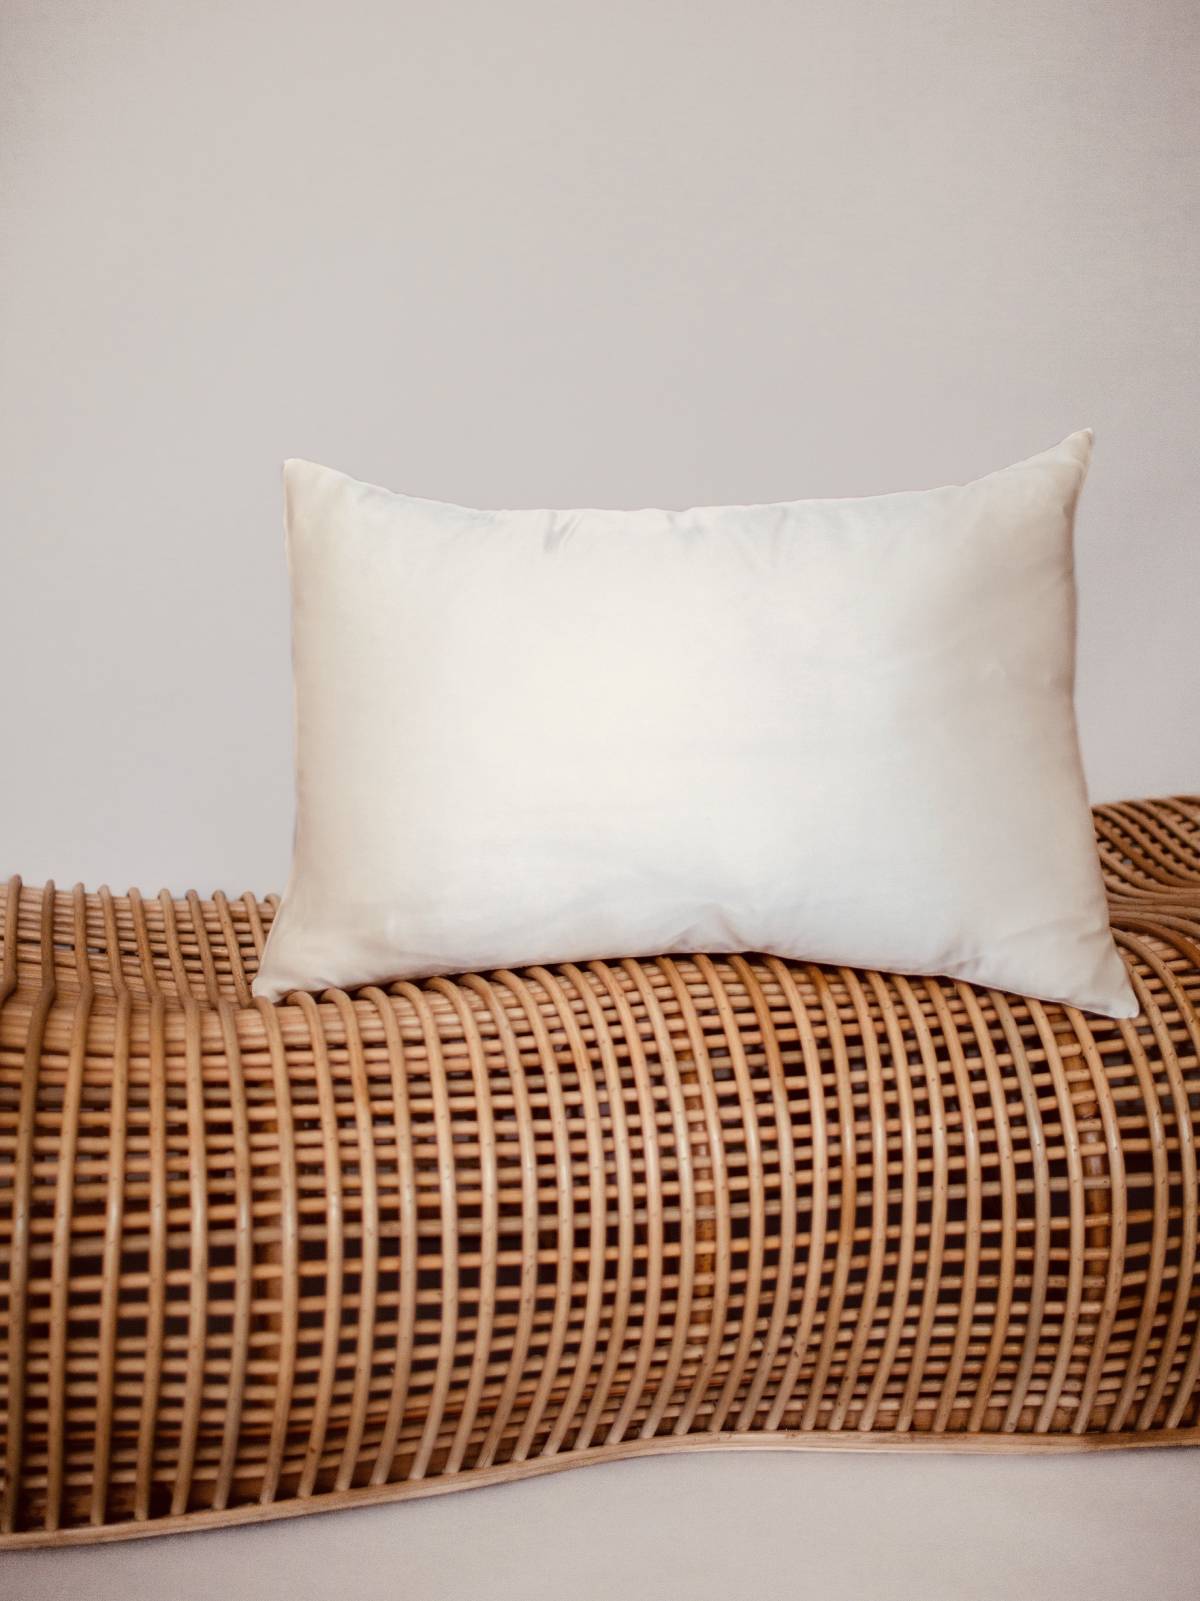 Silk Pillow Case in Ivory